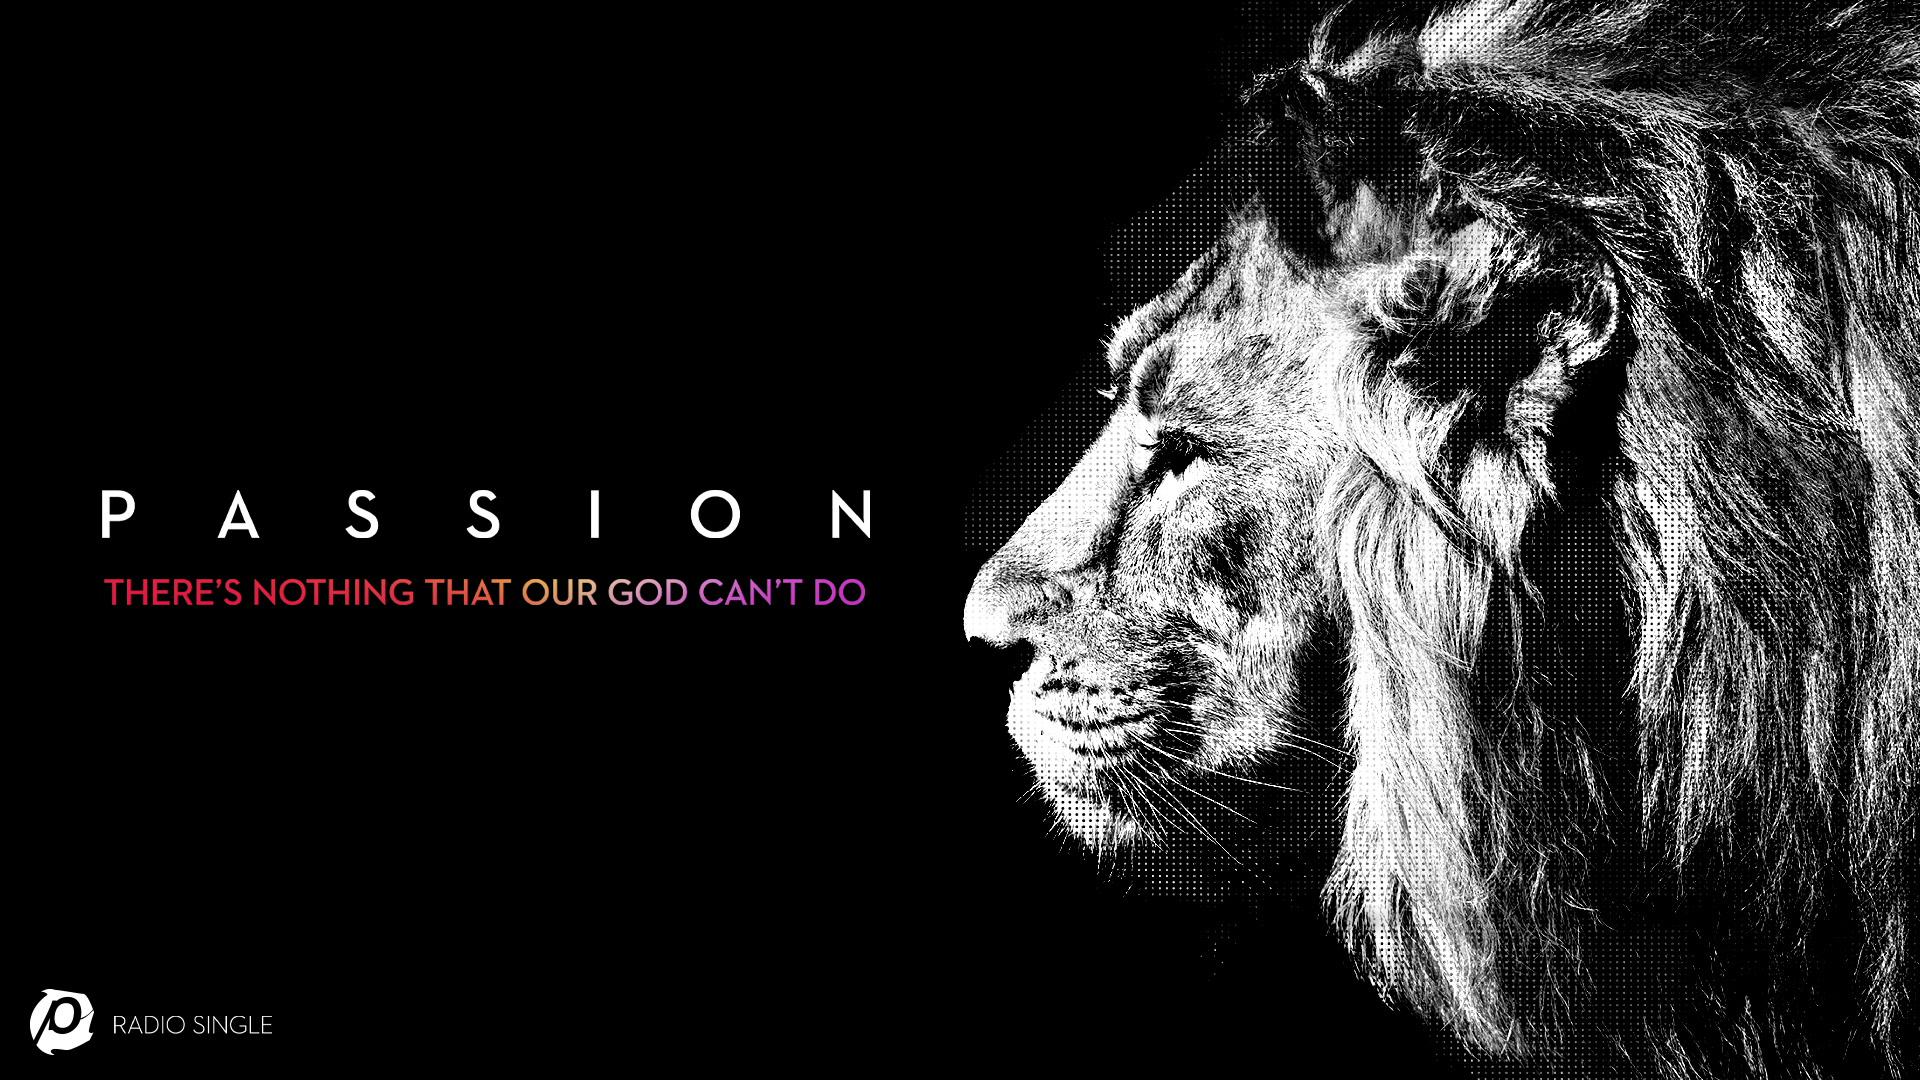 Passion - There’s Nothing That Our God Can’t Do (Radio Version/Audio)